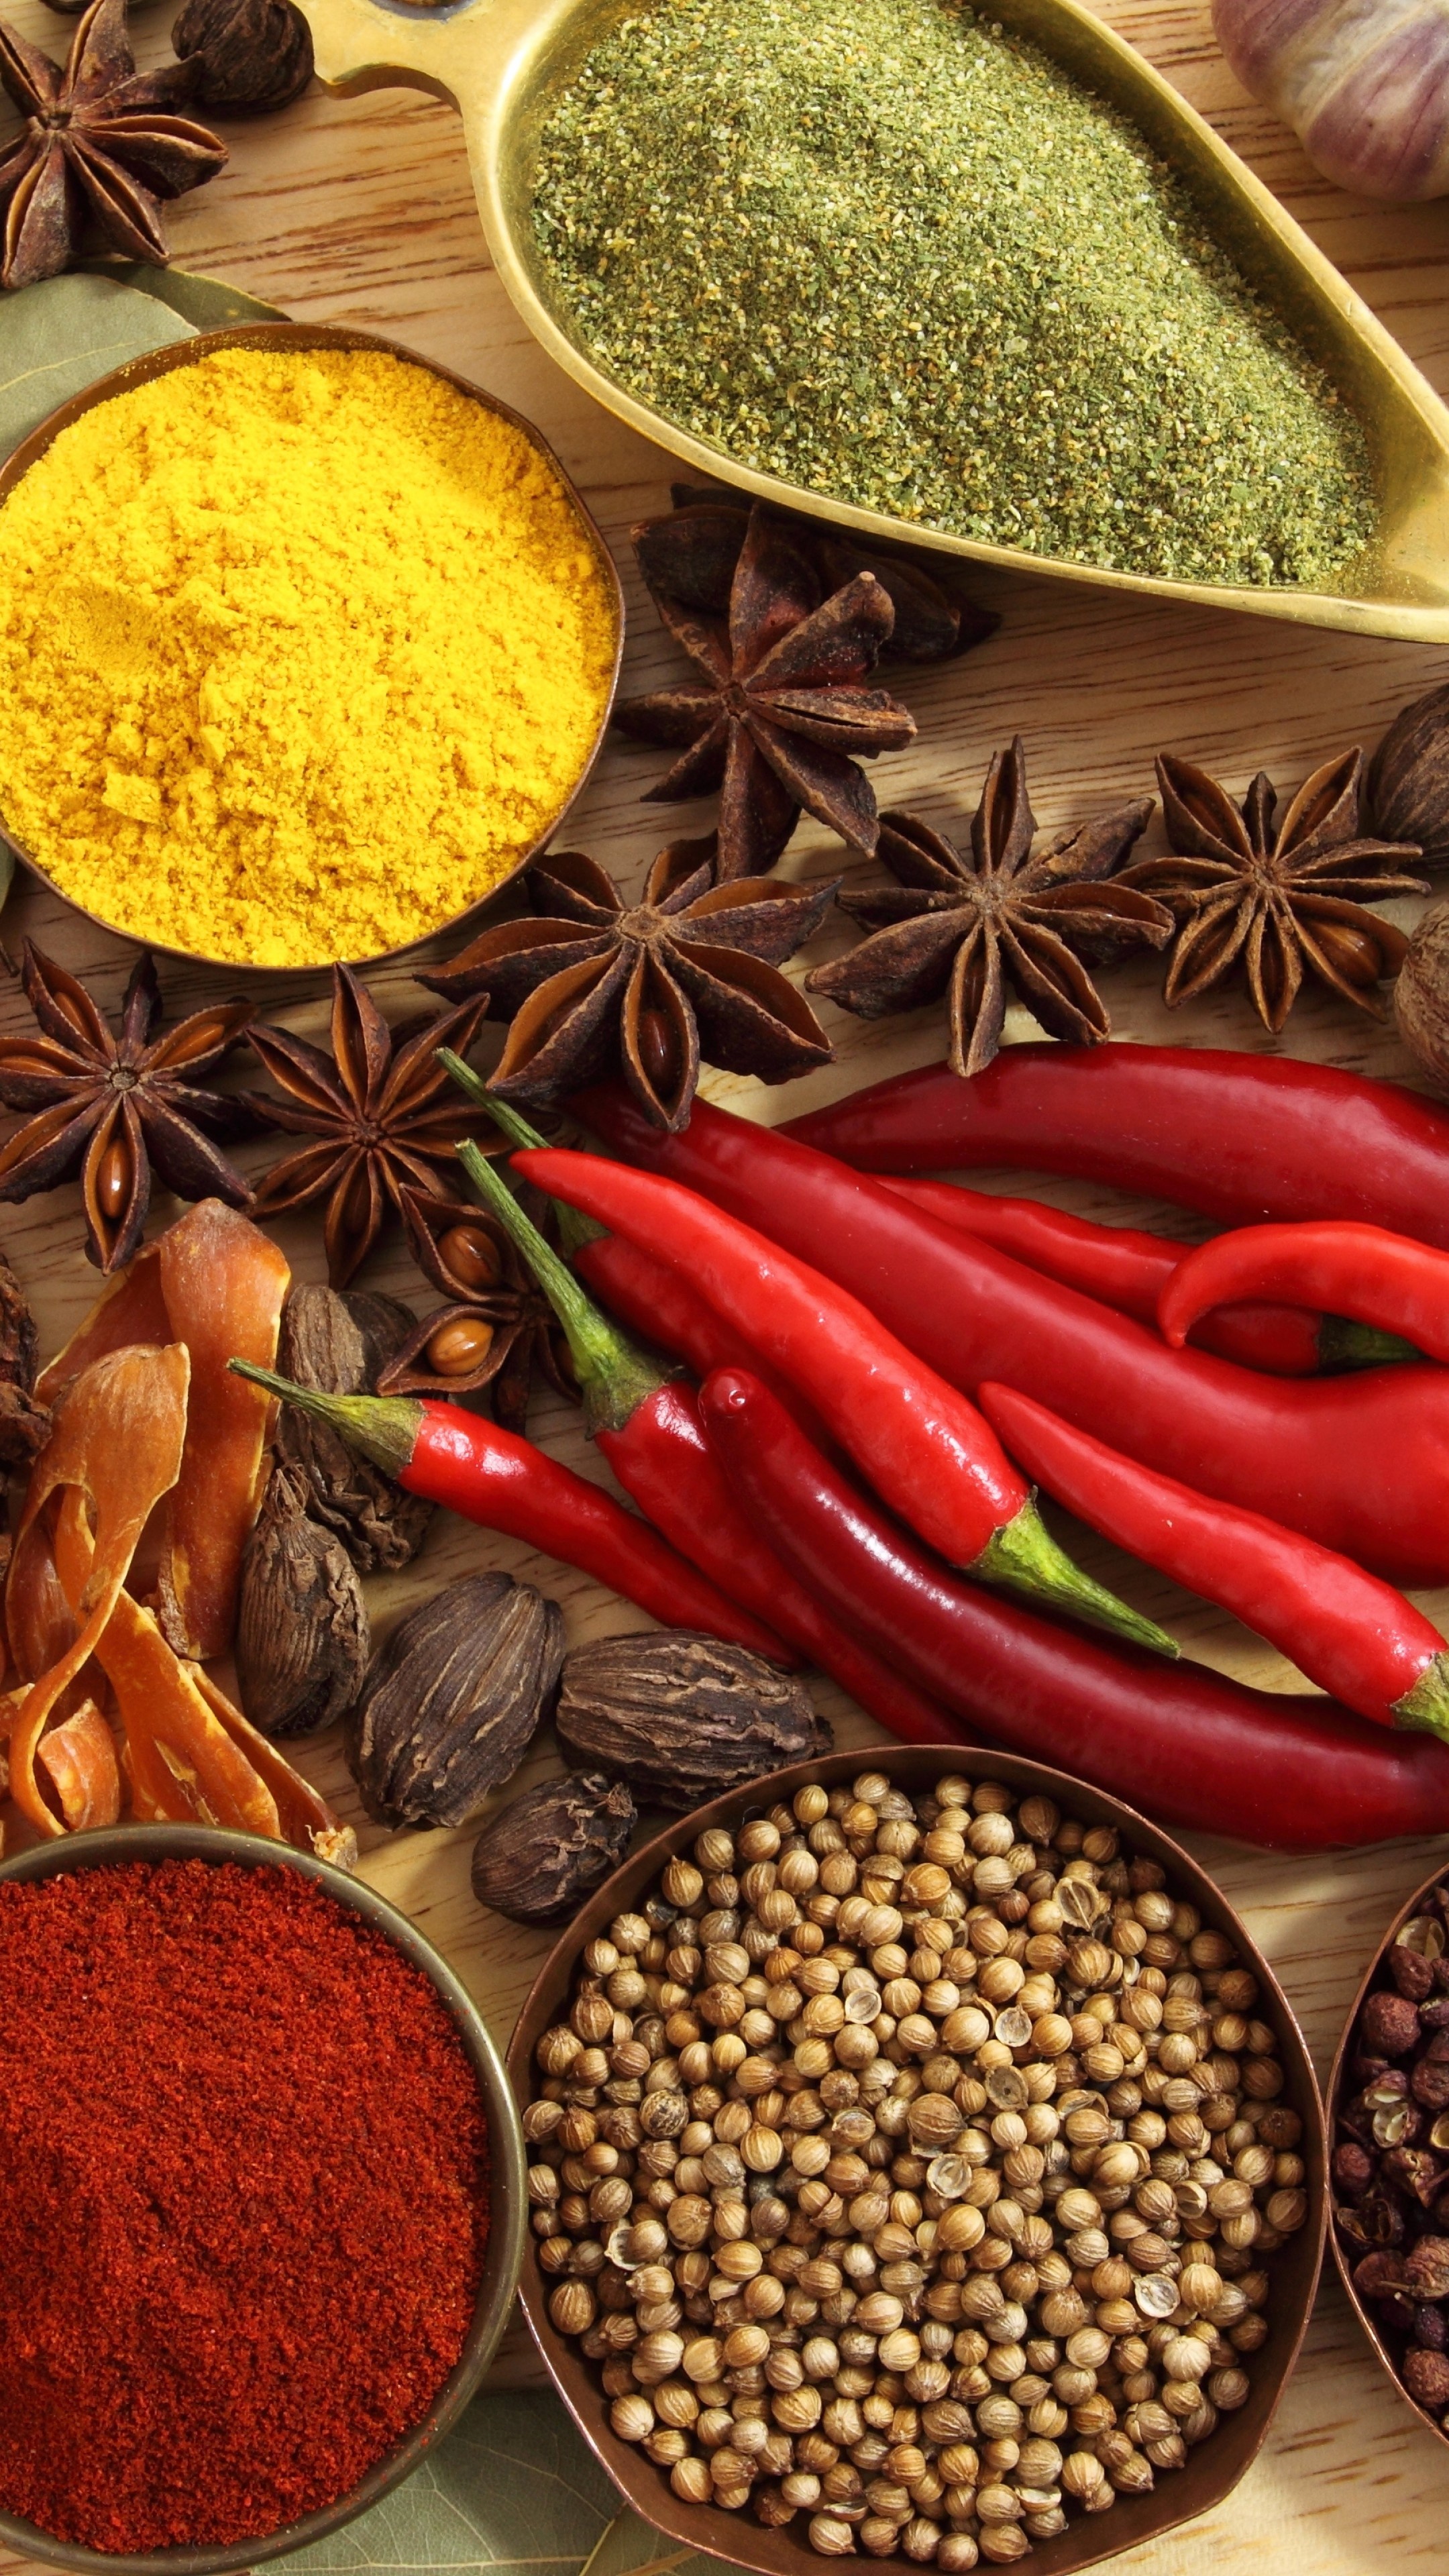 Aromatic spices, Pepper varieties, Spice rack essentials, Flavorful additions, 2160x3840 4K Handy